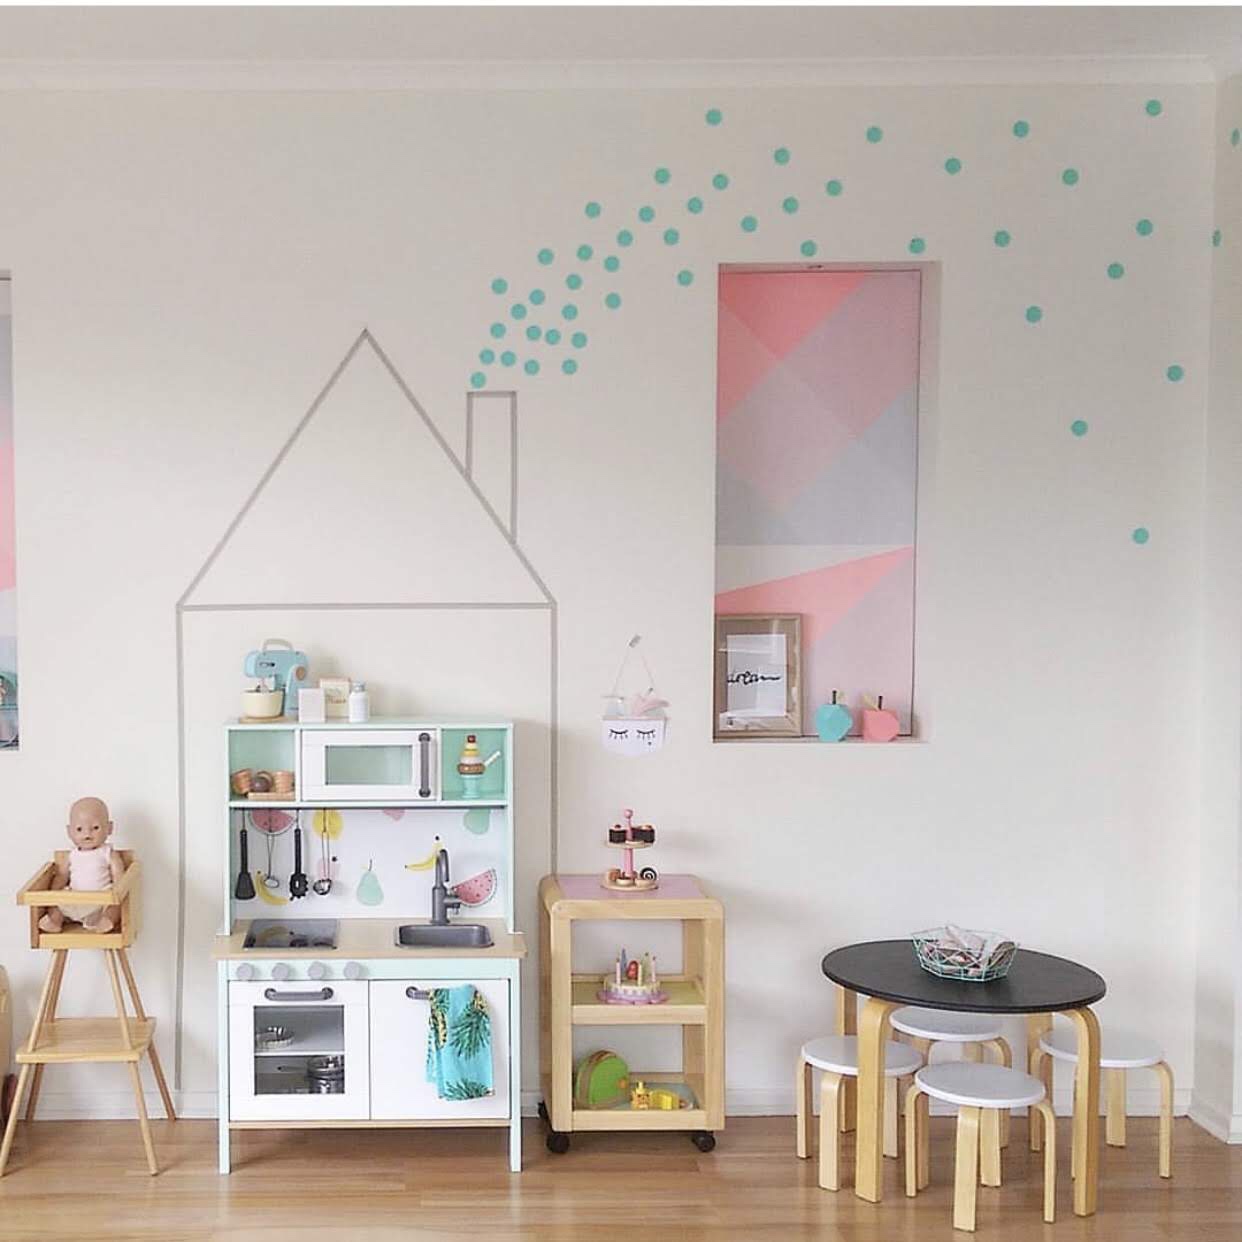 Play area for kids with ikea play kitchen